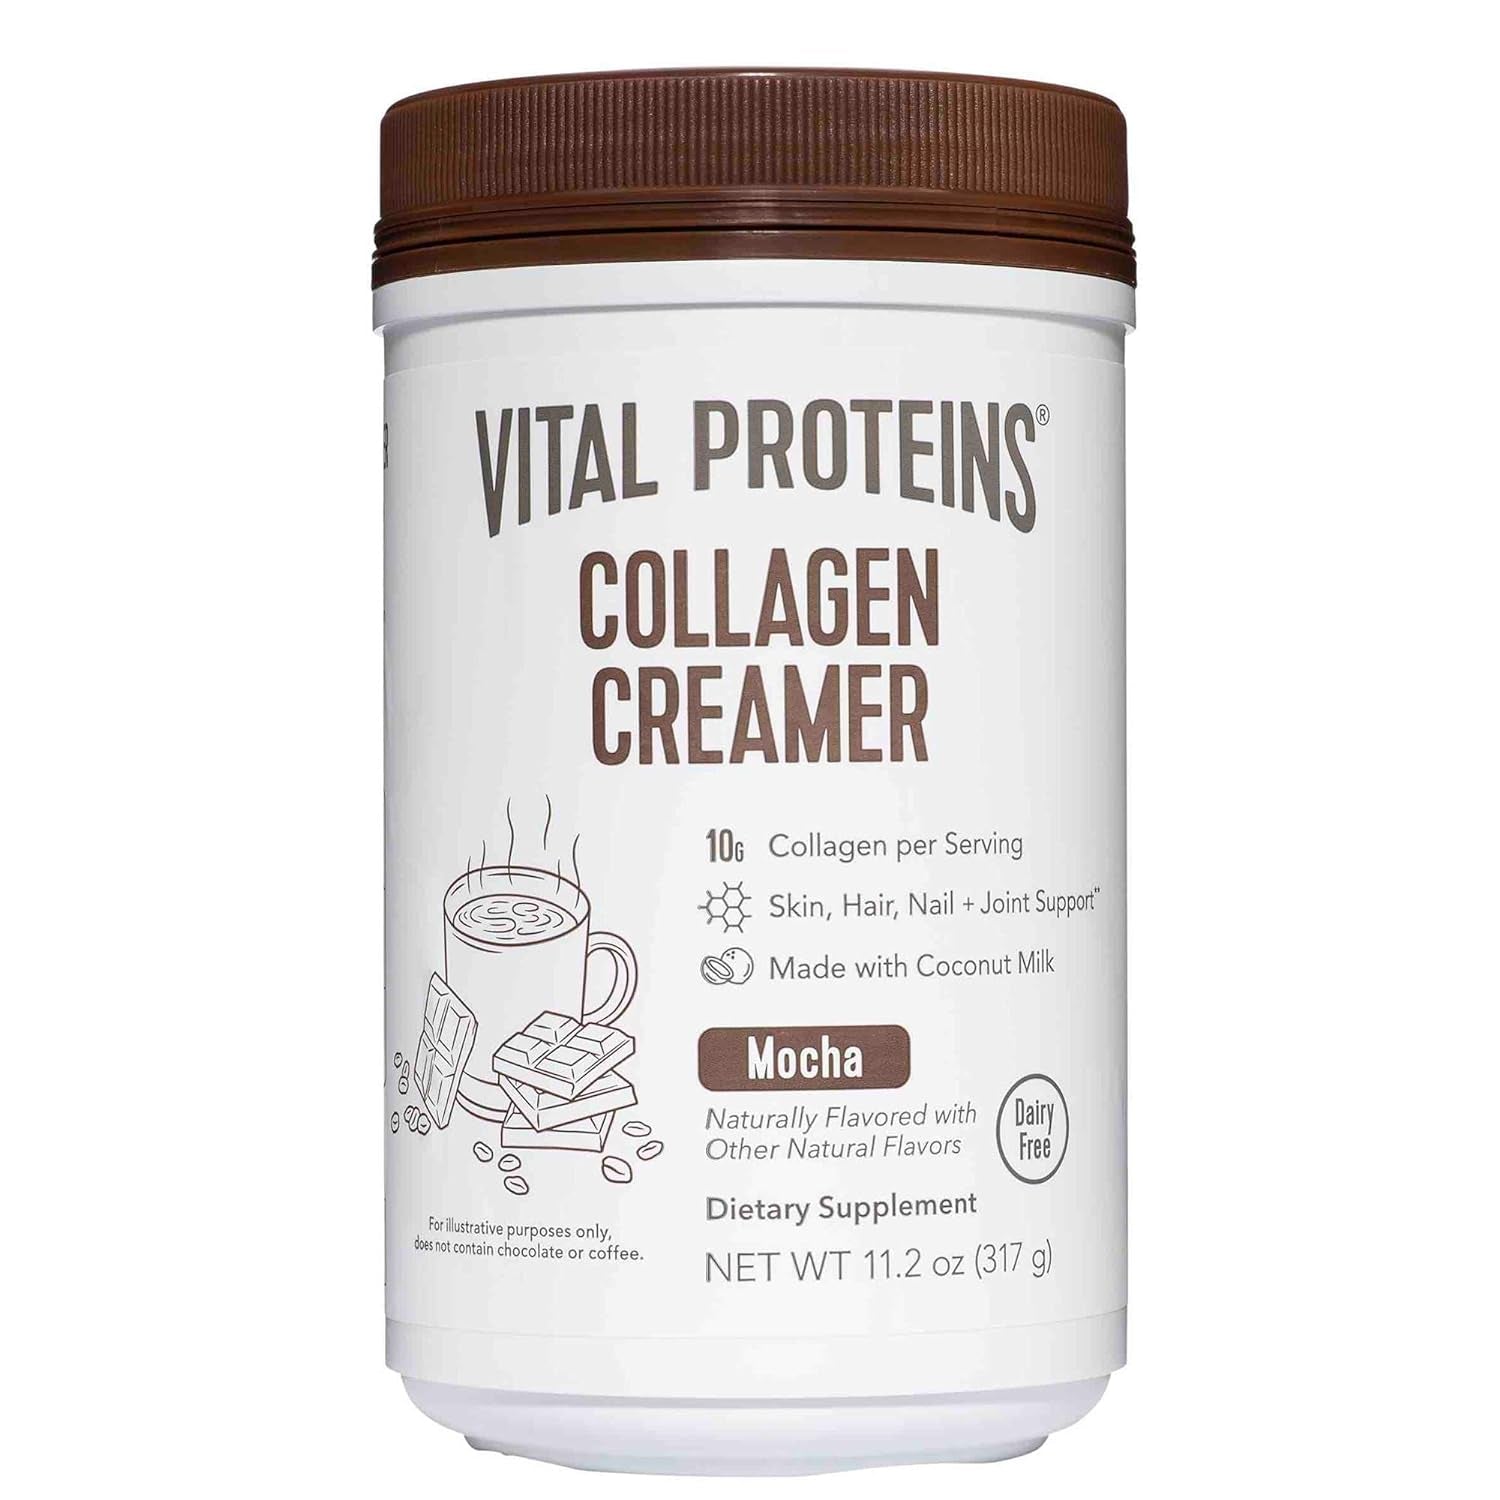 "Coconut Energy-Boosting Collagen Coffee Creamer for Healthy Hair, Skin, and Nails - 10.3 Oz"